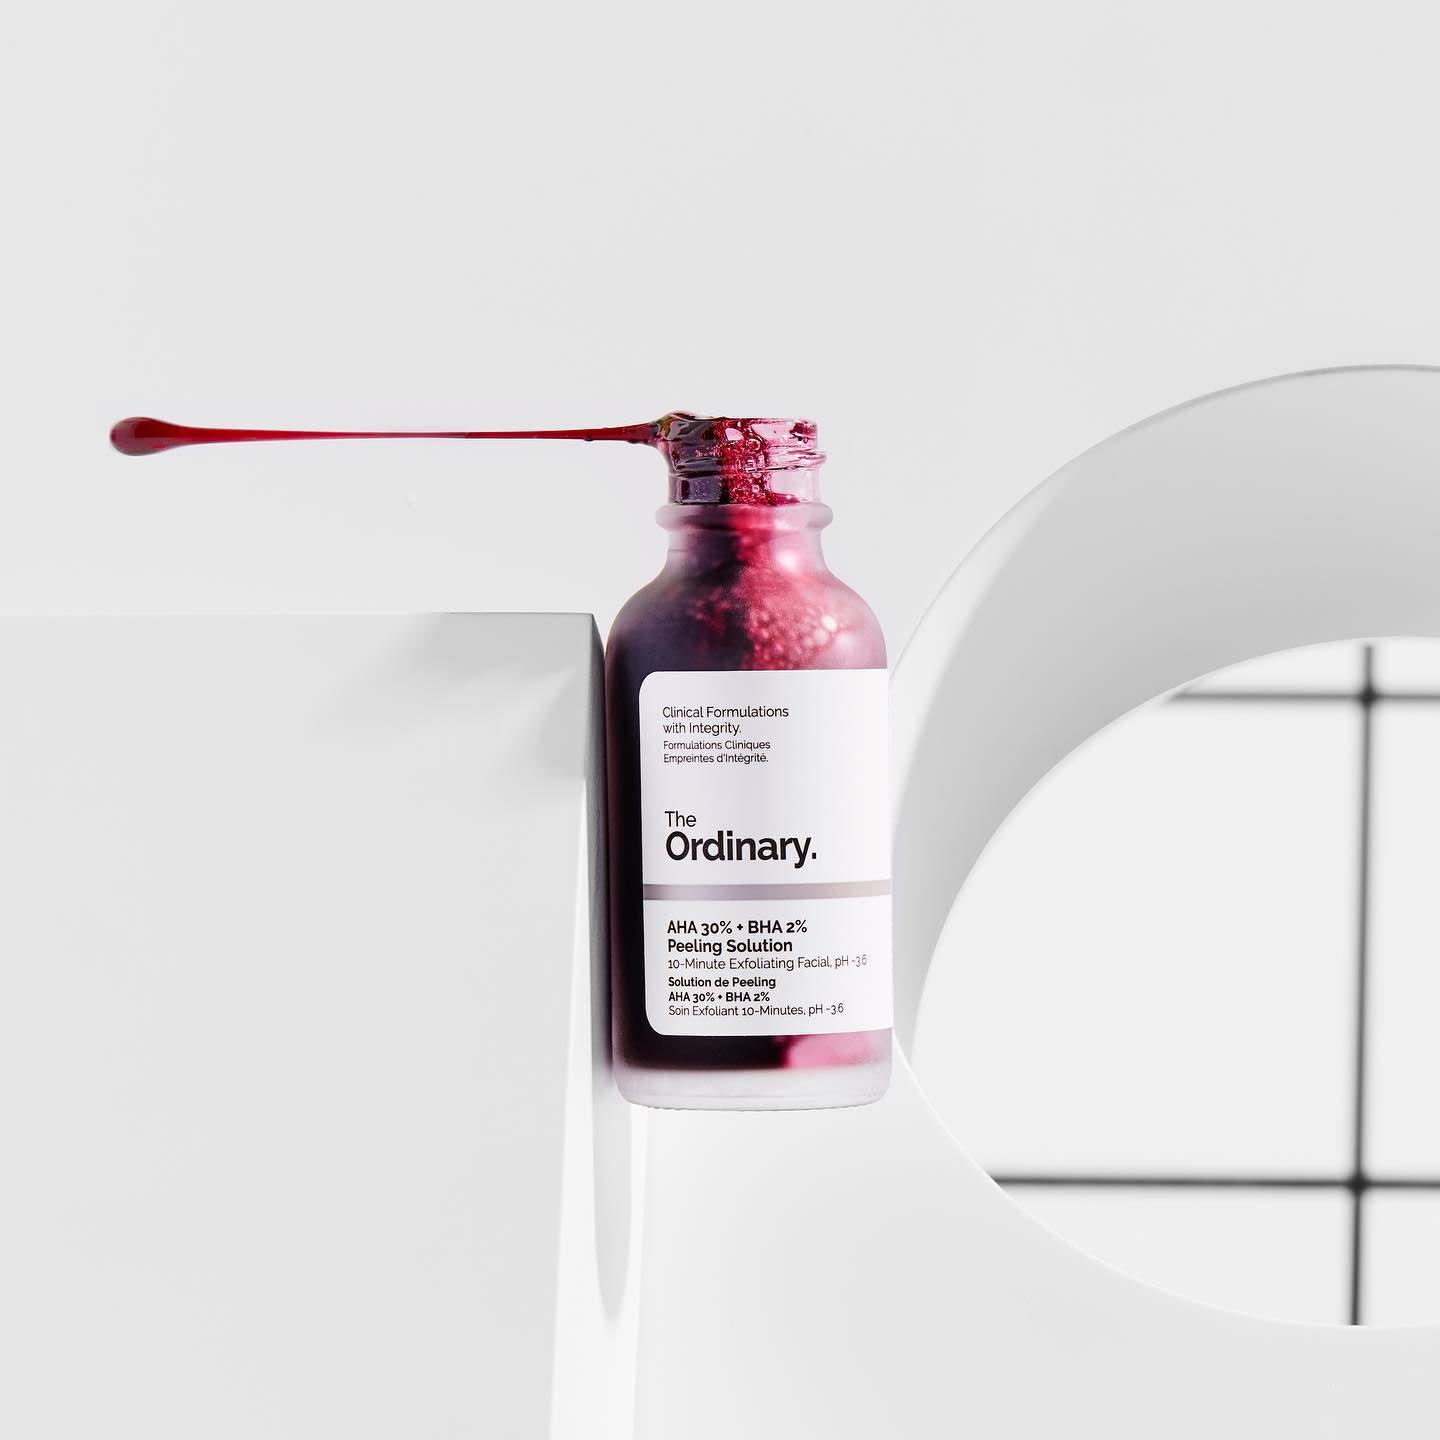 bottle of The Ordinary solution with red liquid inside